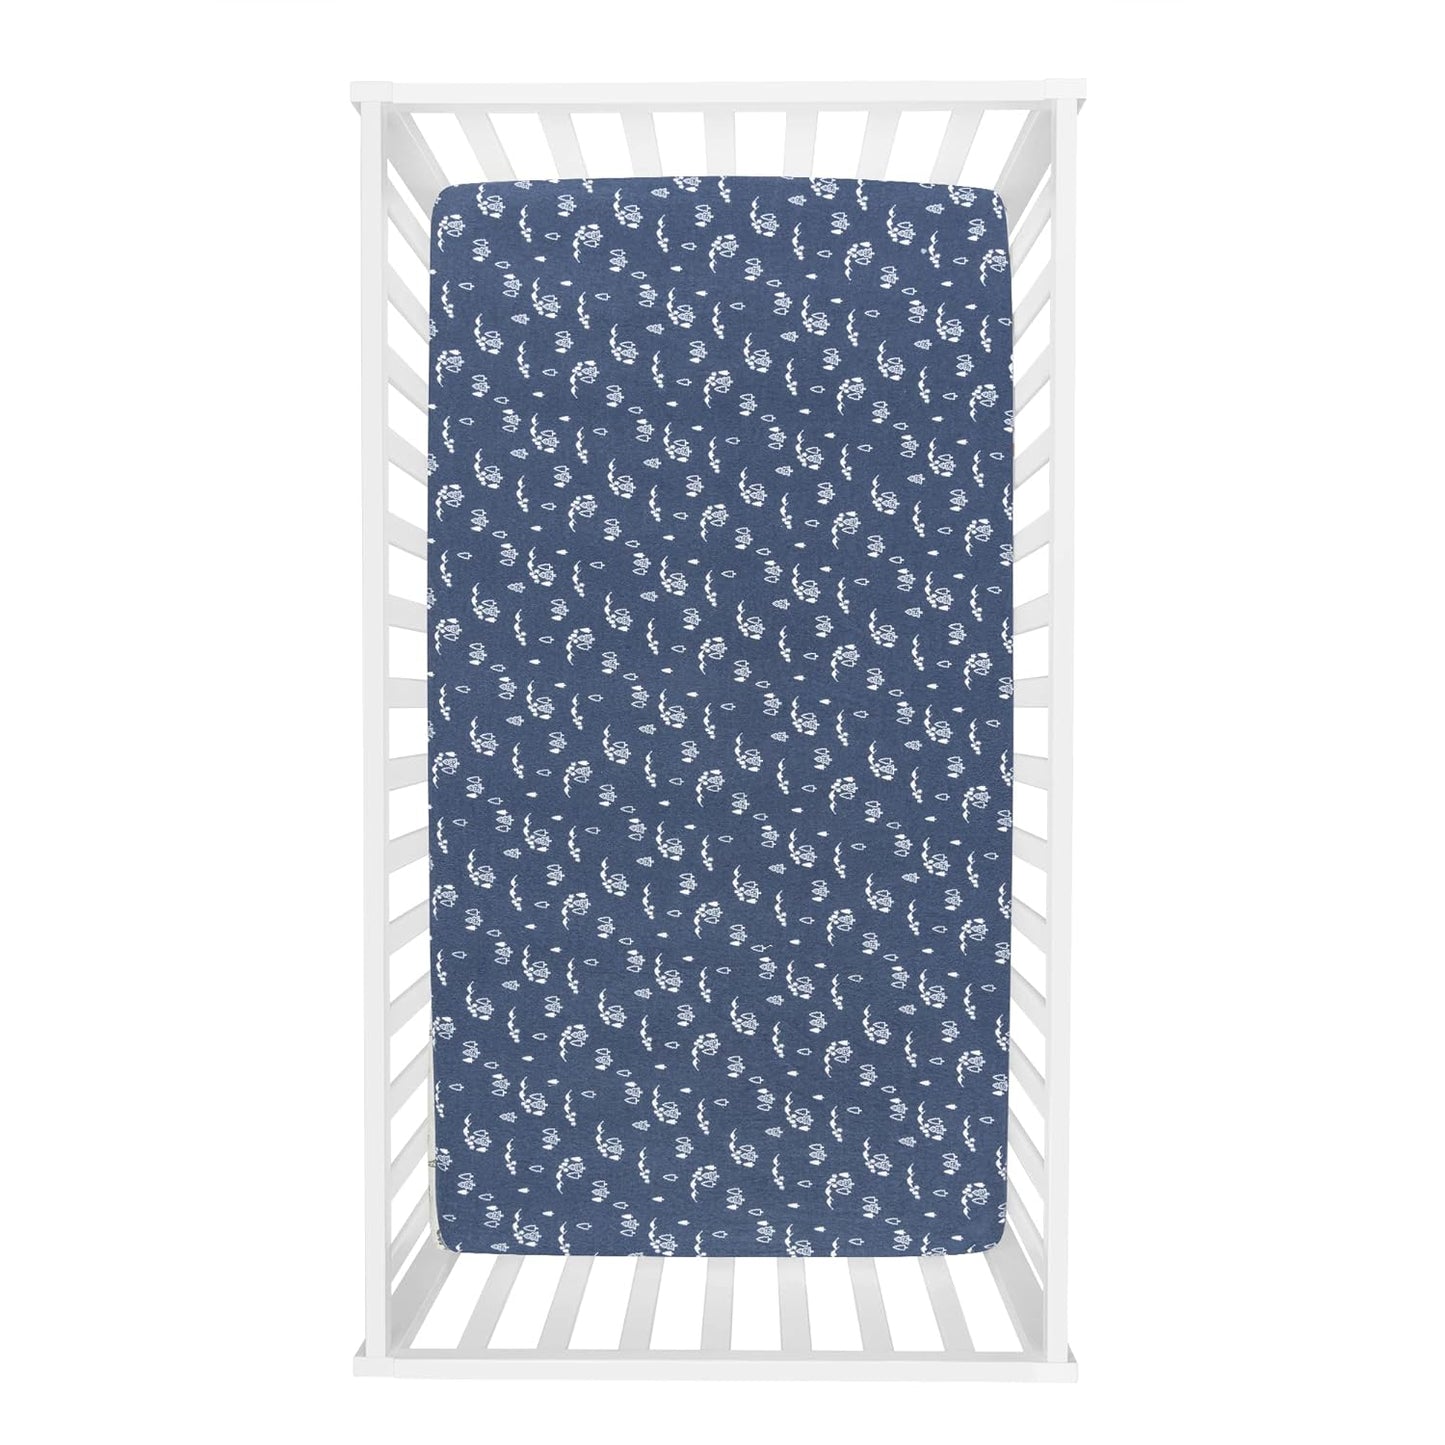 Mountains Fitted Crib Sheet- 100% Cotton; Navy, White; Fully Elasticized; 10-Inch Pockets; Fits Standard Crib Mattress;